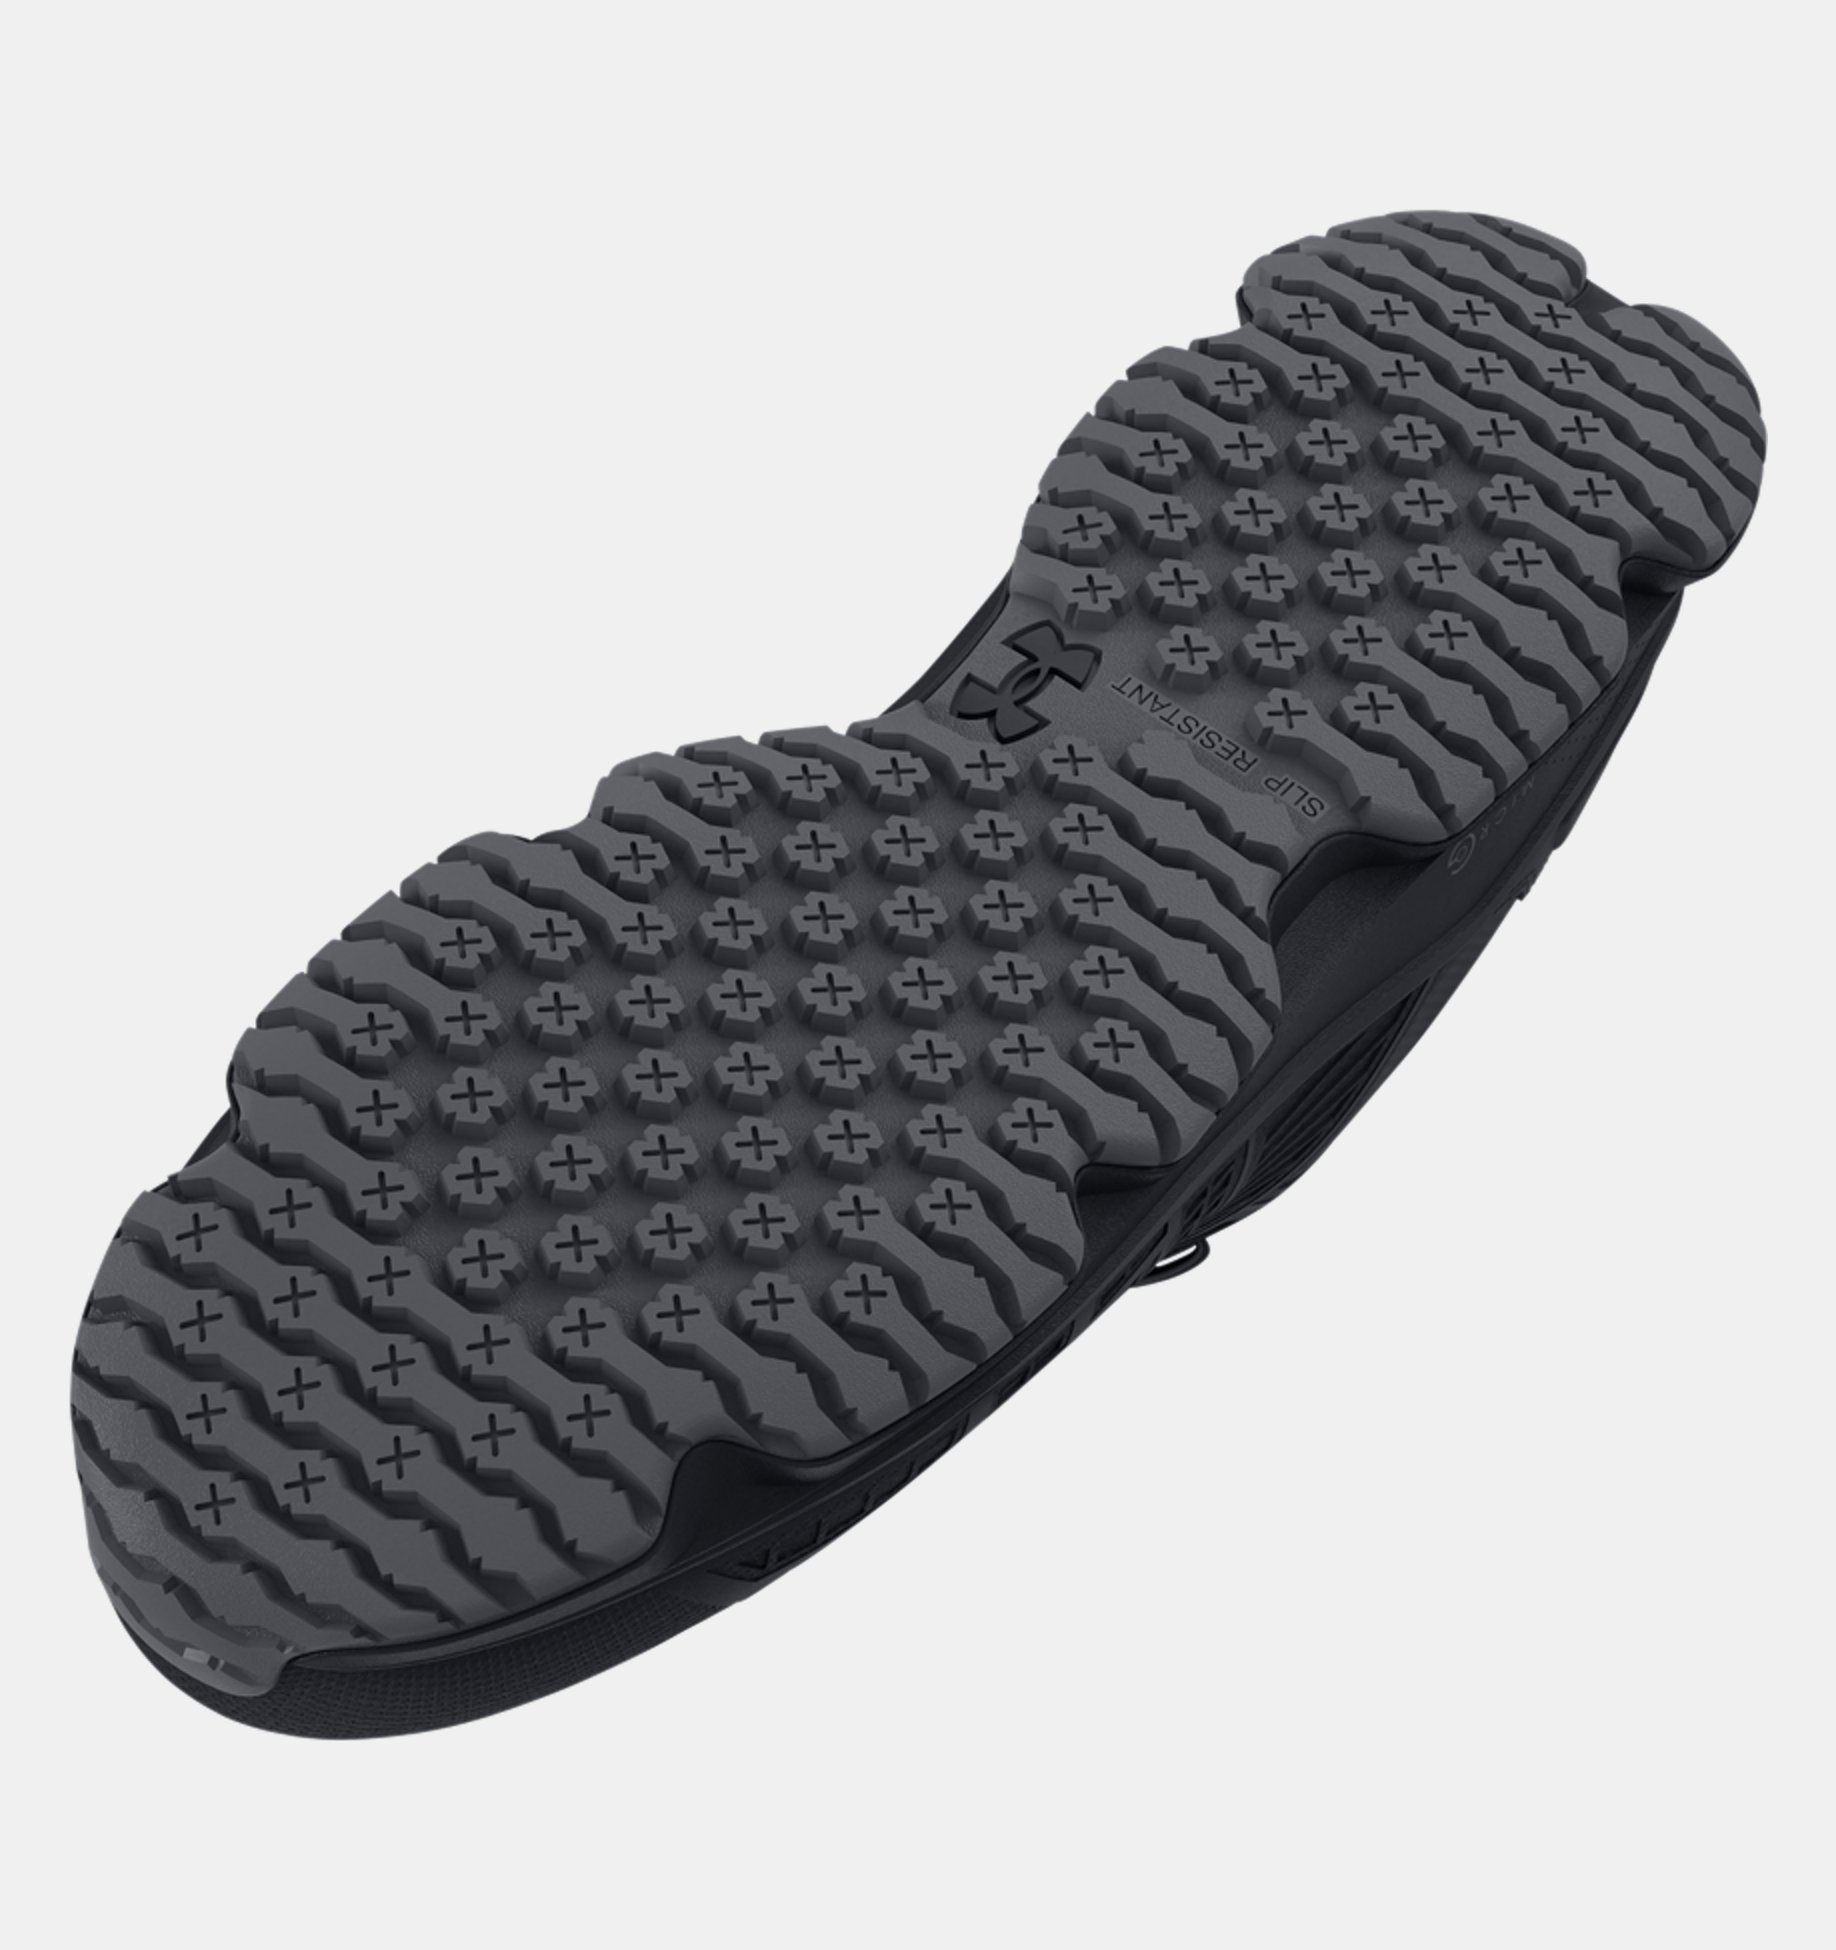 Does Under Armour Make Slip Resistant Shoes?